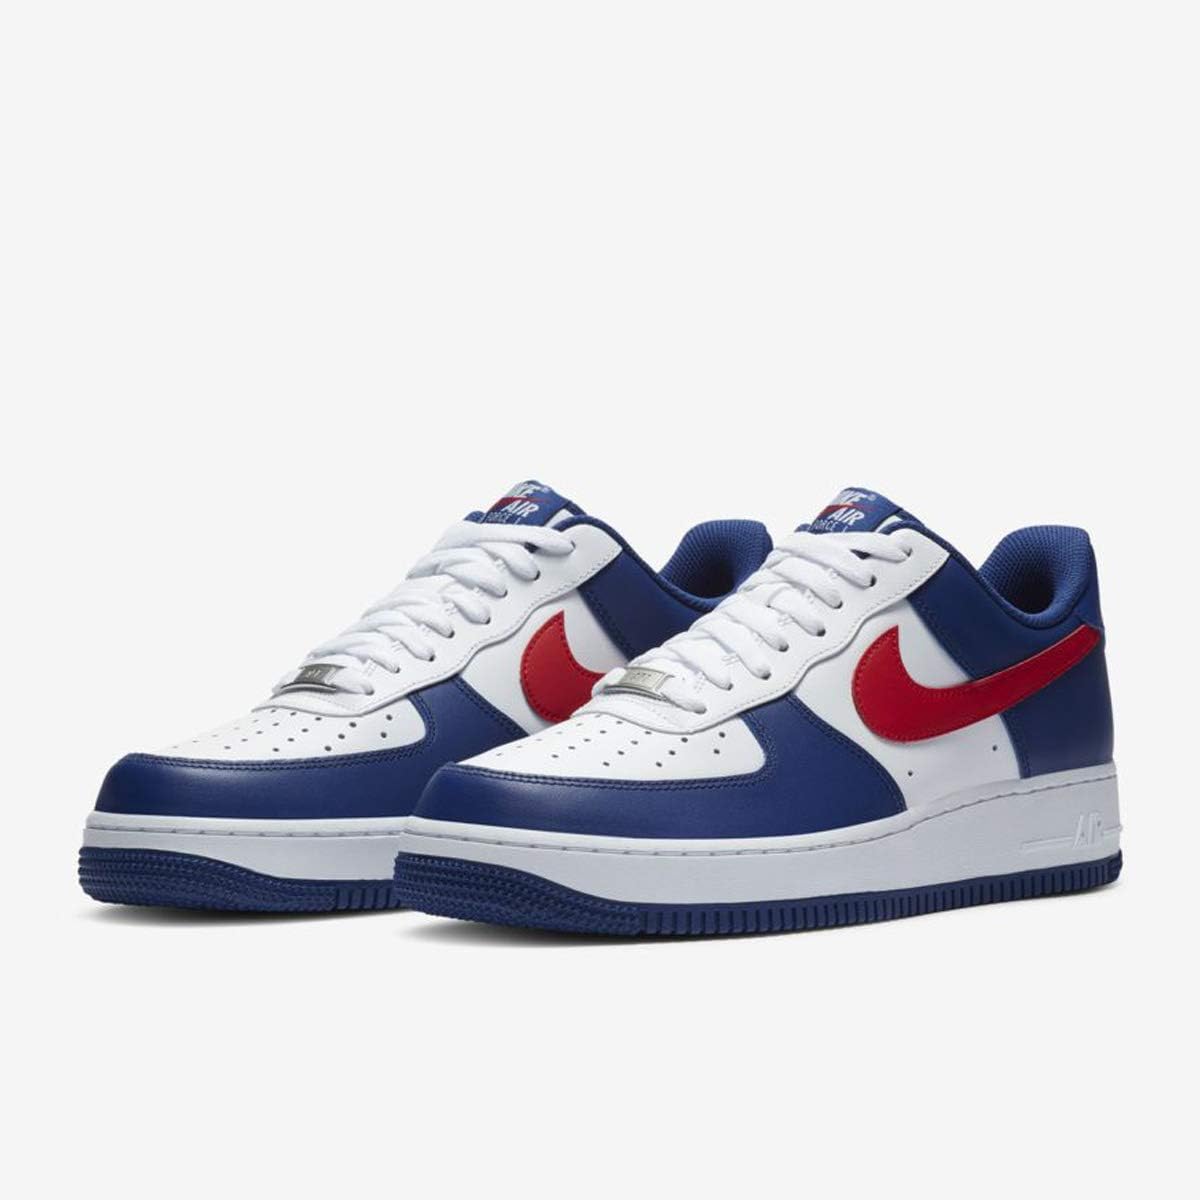 Men's Nike Air Force 1 '07 White/University Red (CZ9164 100) - 11.5 - image 2 of 5